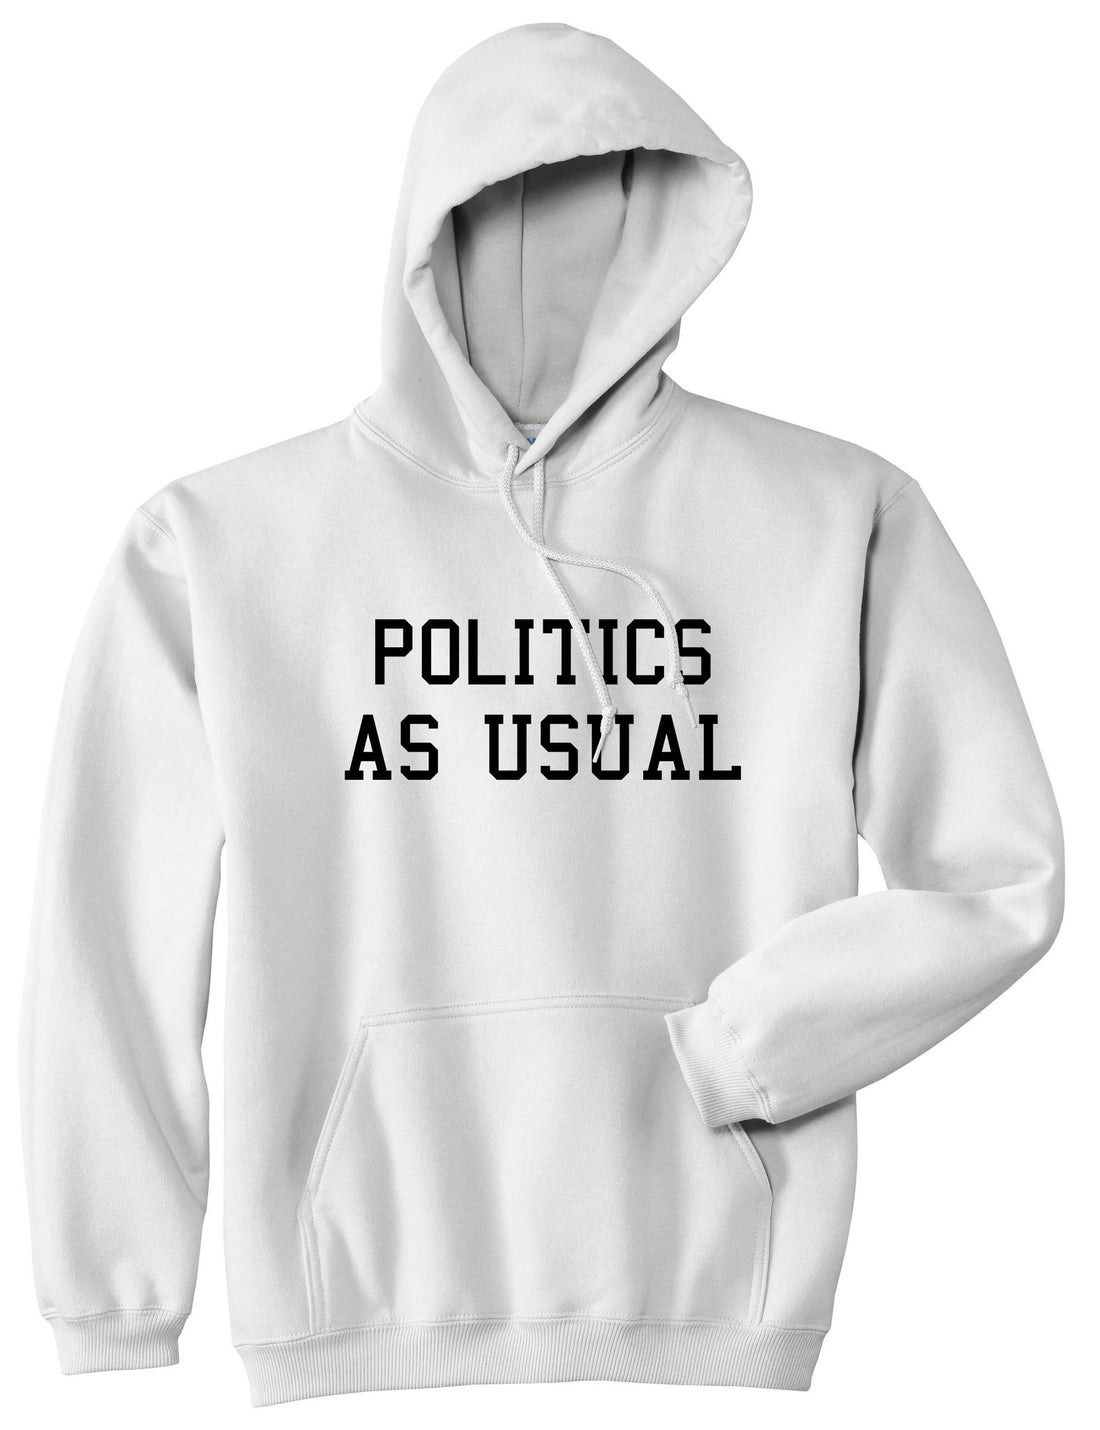 Politics As Usual Hiphop Lyrics Jay 23 Z Old School Pullover Hoodie Hoody in White by Kings Of NY